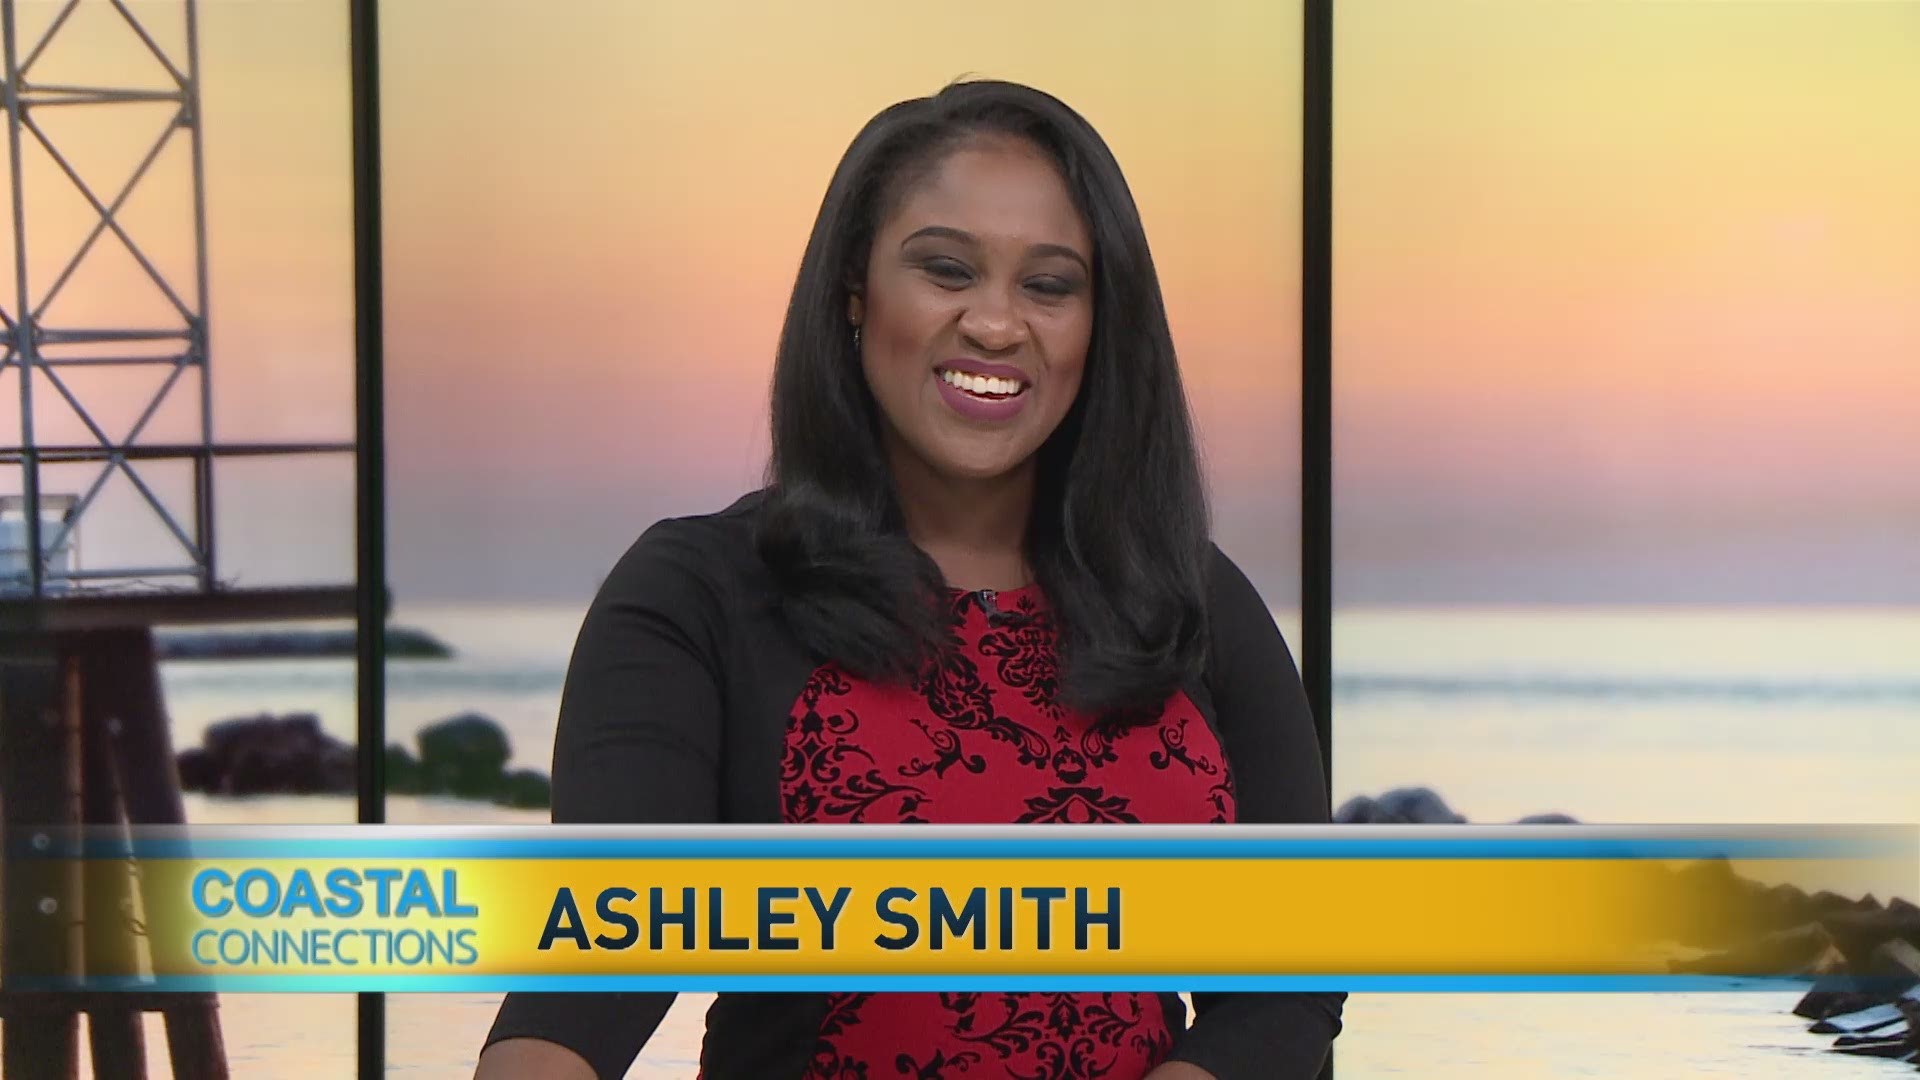 April edition of Coastal Connections with Ashley Smith, featuring VA Tattoo, Masonic Masquerade, End Stroke Jazz Brunch, Symphonicity, and Project PlantIt! Coastal Connections is a 13NewsNow show that hosts local organizations that put on charity events, fundraisers, and expos.